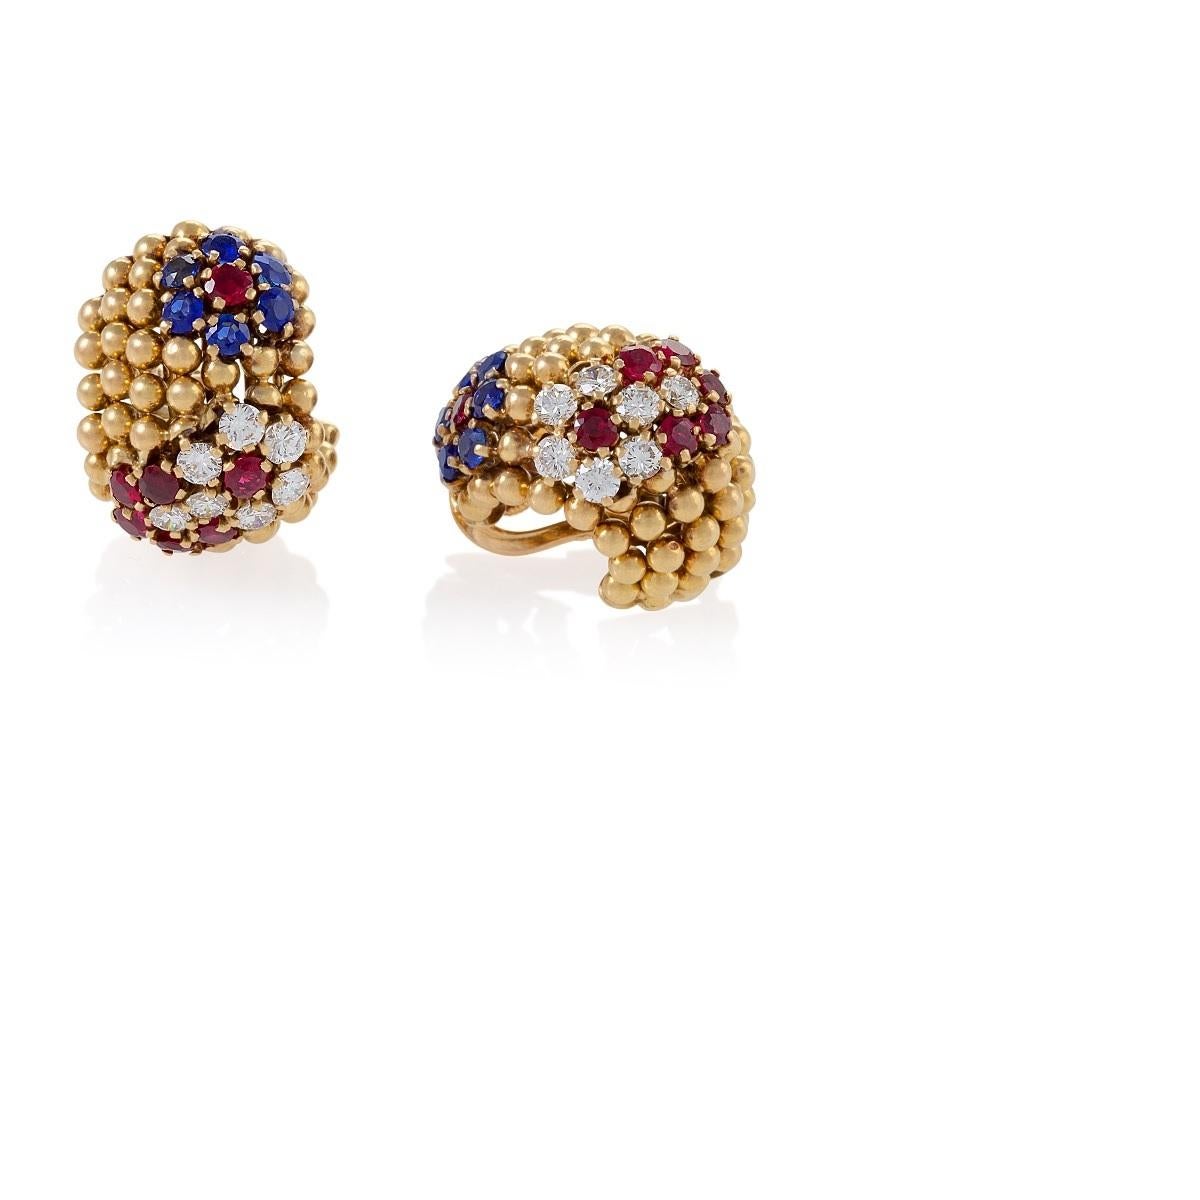 A pair of French Mid-20th Century 18 karat gold ear clips by Van Cleef and Arpels with diamonds, rubies and sapphires. The 12 round-cut diamonds have the approximate total weight of 1.68 carats and the approximate total weight of the 24 round